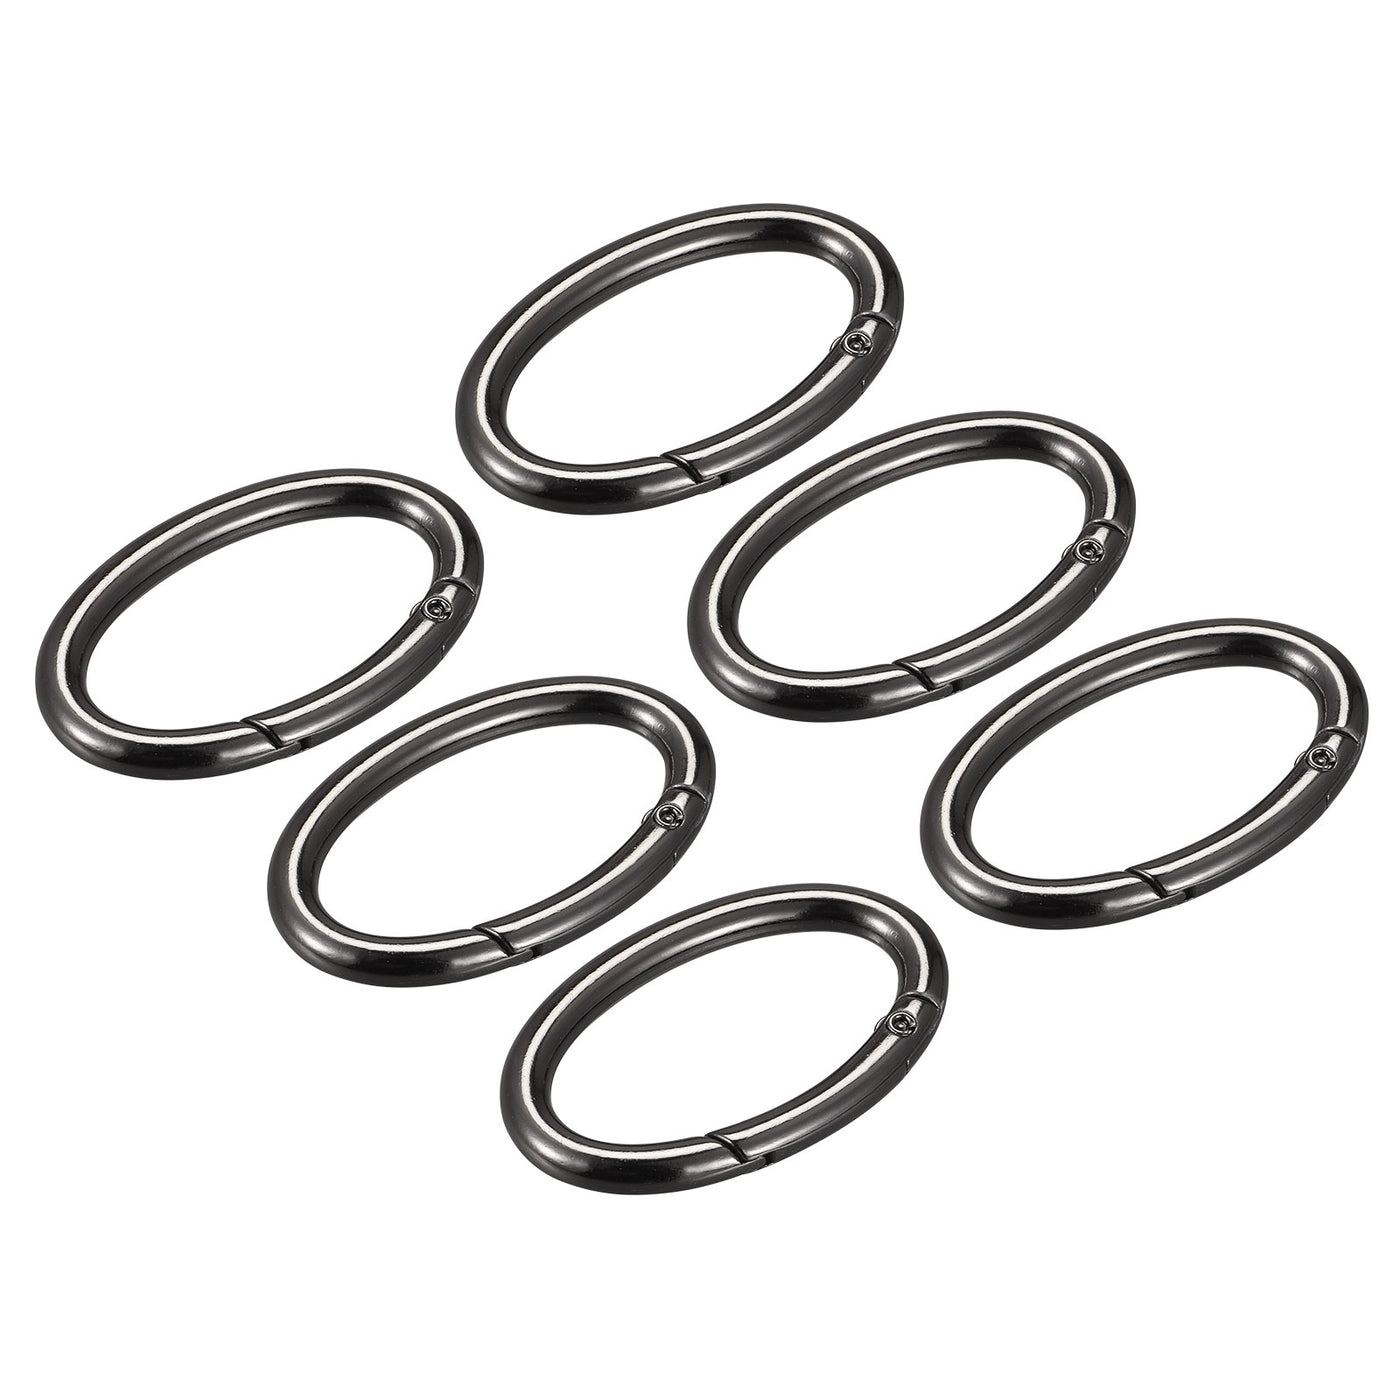 uxcell Uxcell 1.85 Inch Spring Oval Ring Snap Clip Trigger for Bag Purse Keychain, 6Pcs Black